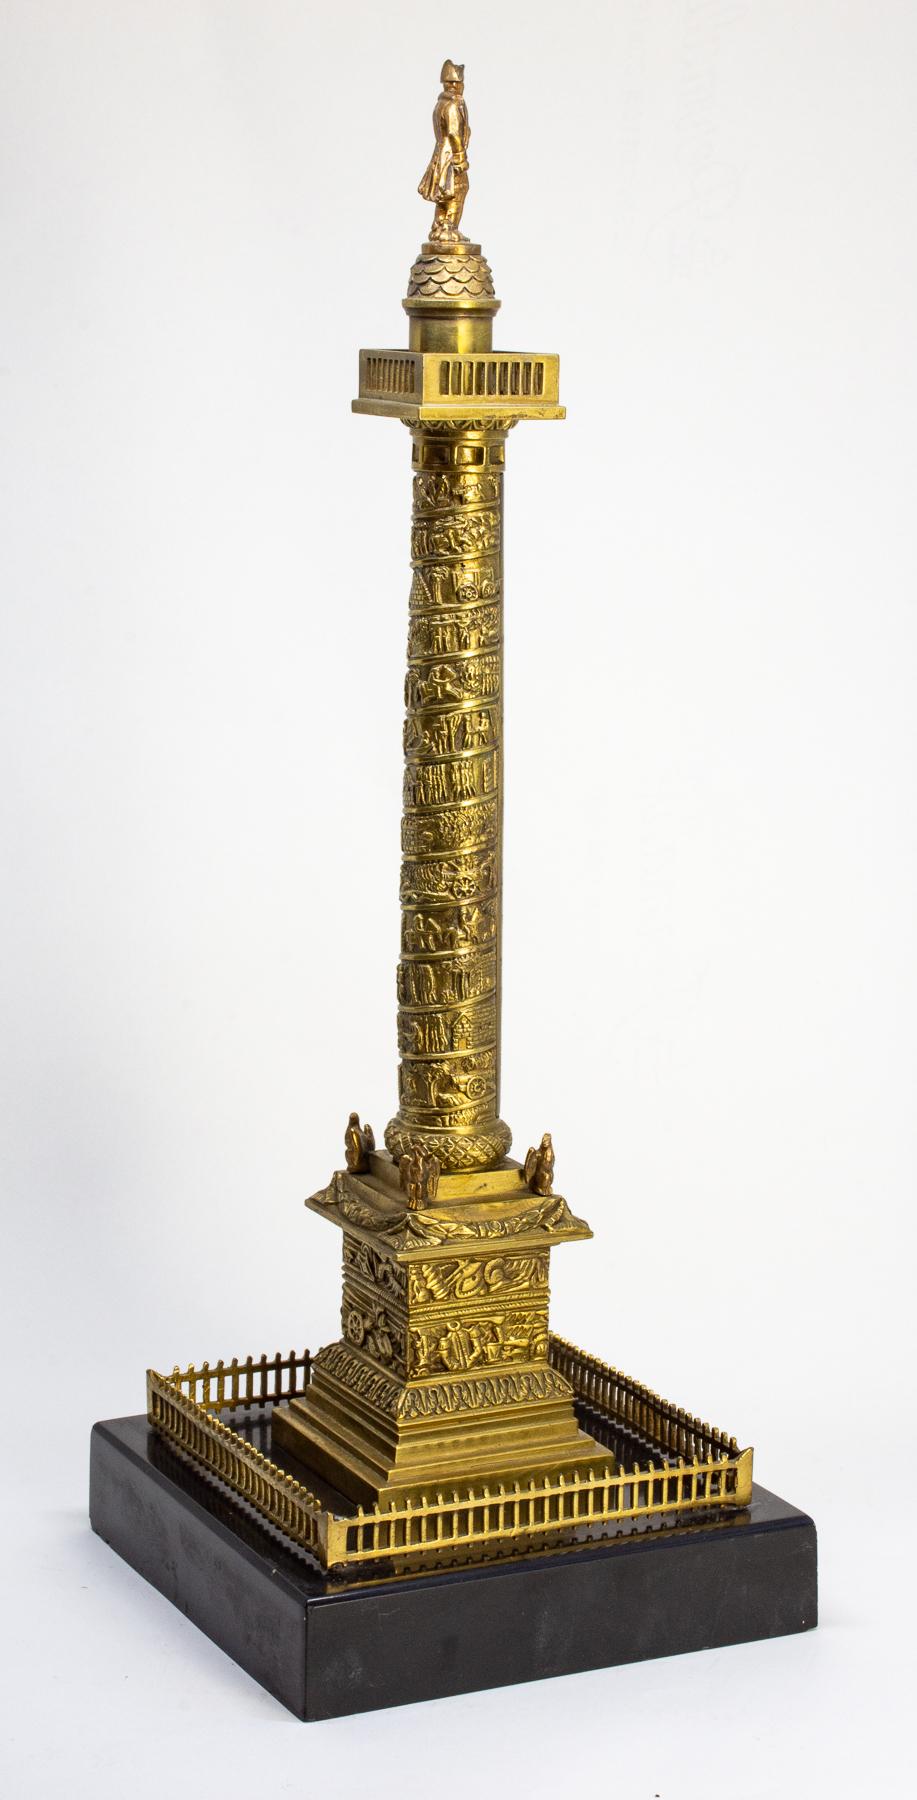 Gilded Bronze Model of the Vendome Column, Paris - thermometer, circa 1850

Paris’ Vendome Column, raised in 1810 to celebrate Napoleon’s victory at Austerlitz five years earlier, has had at its Summit a succession of flags and figures, including